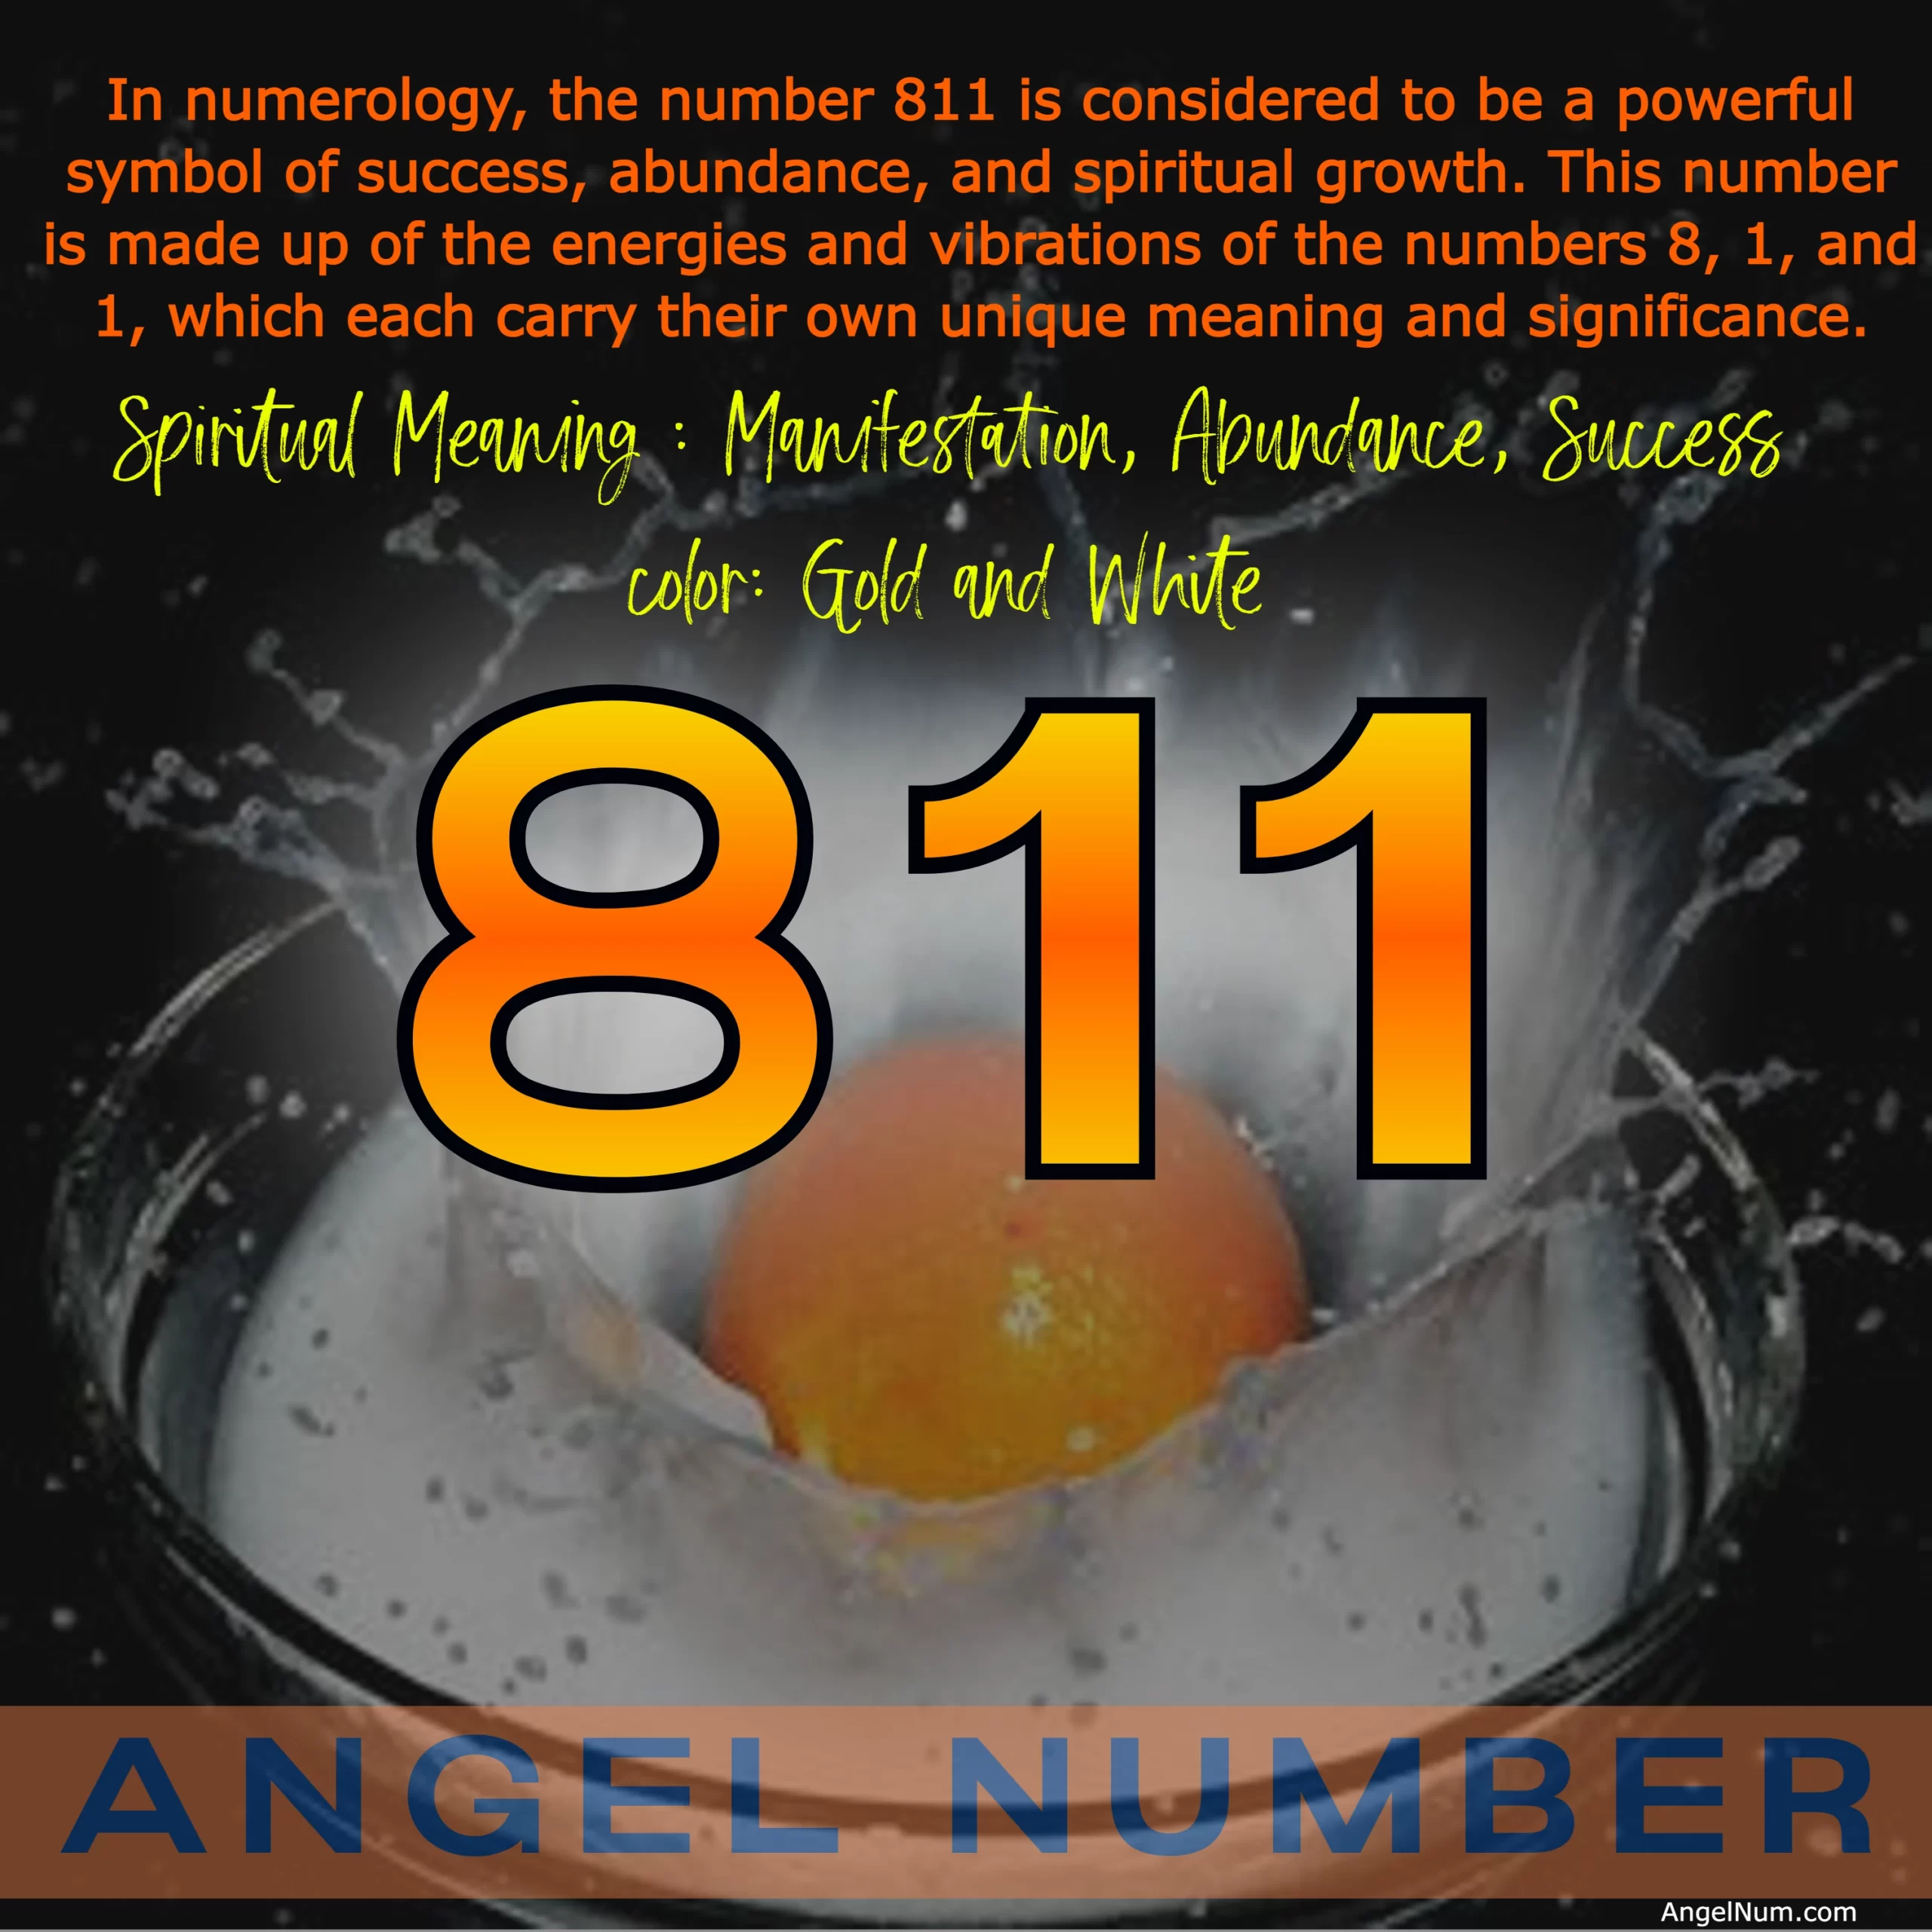 Angel Number 811: What It Means and How to Interpret Its Message